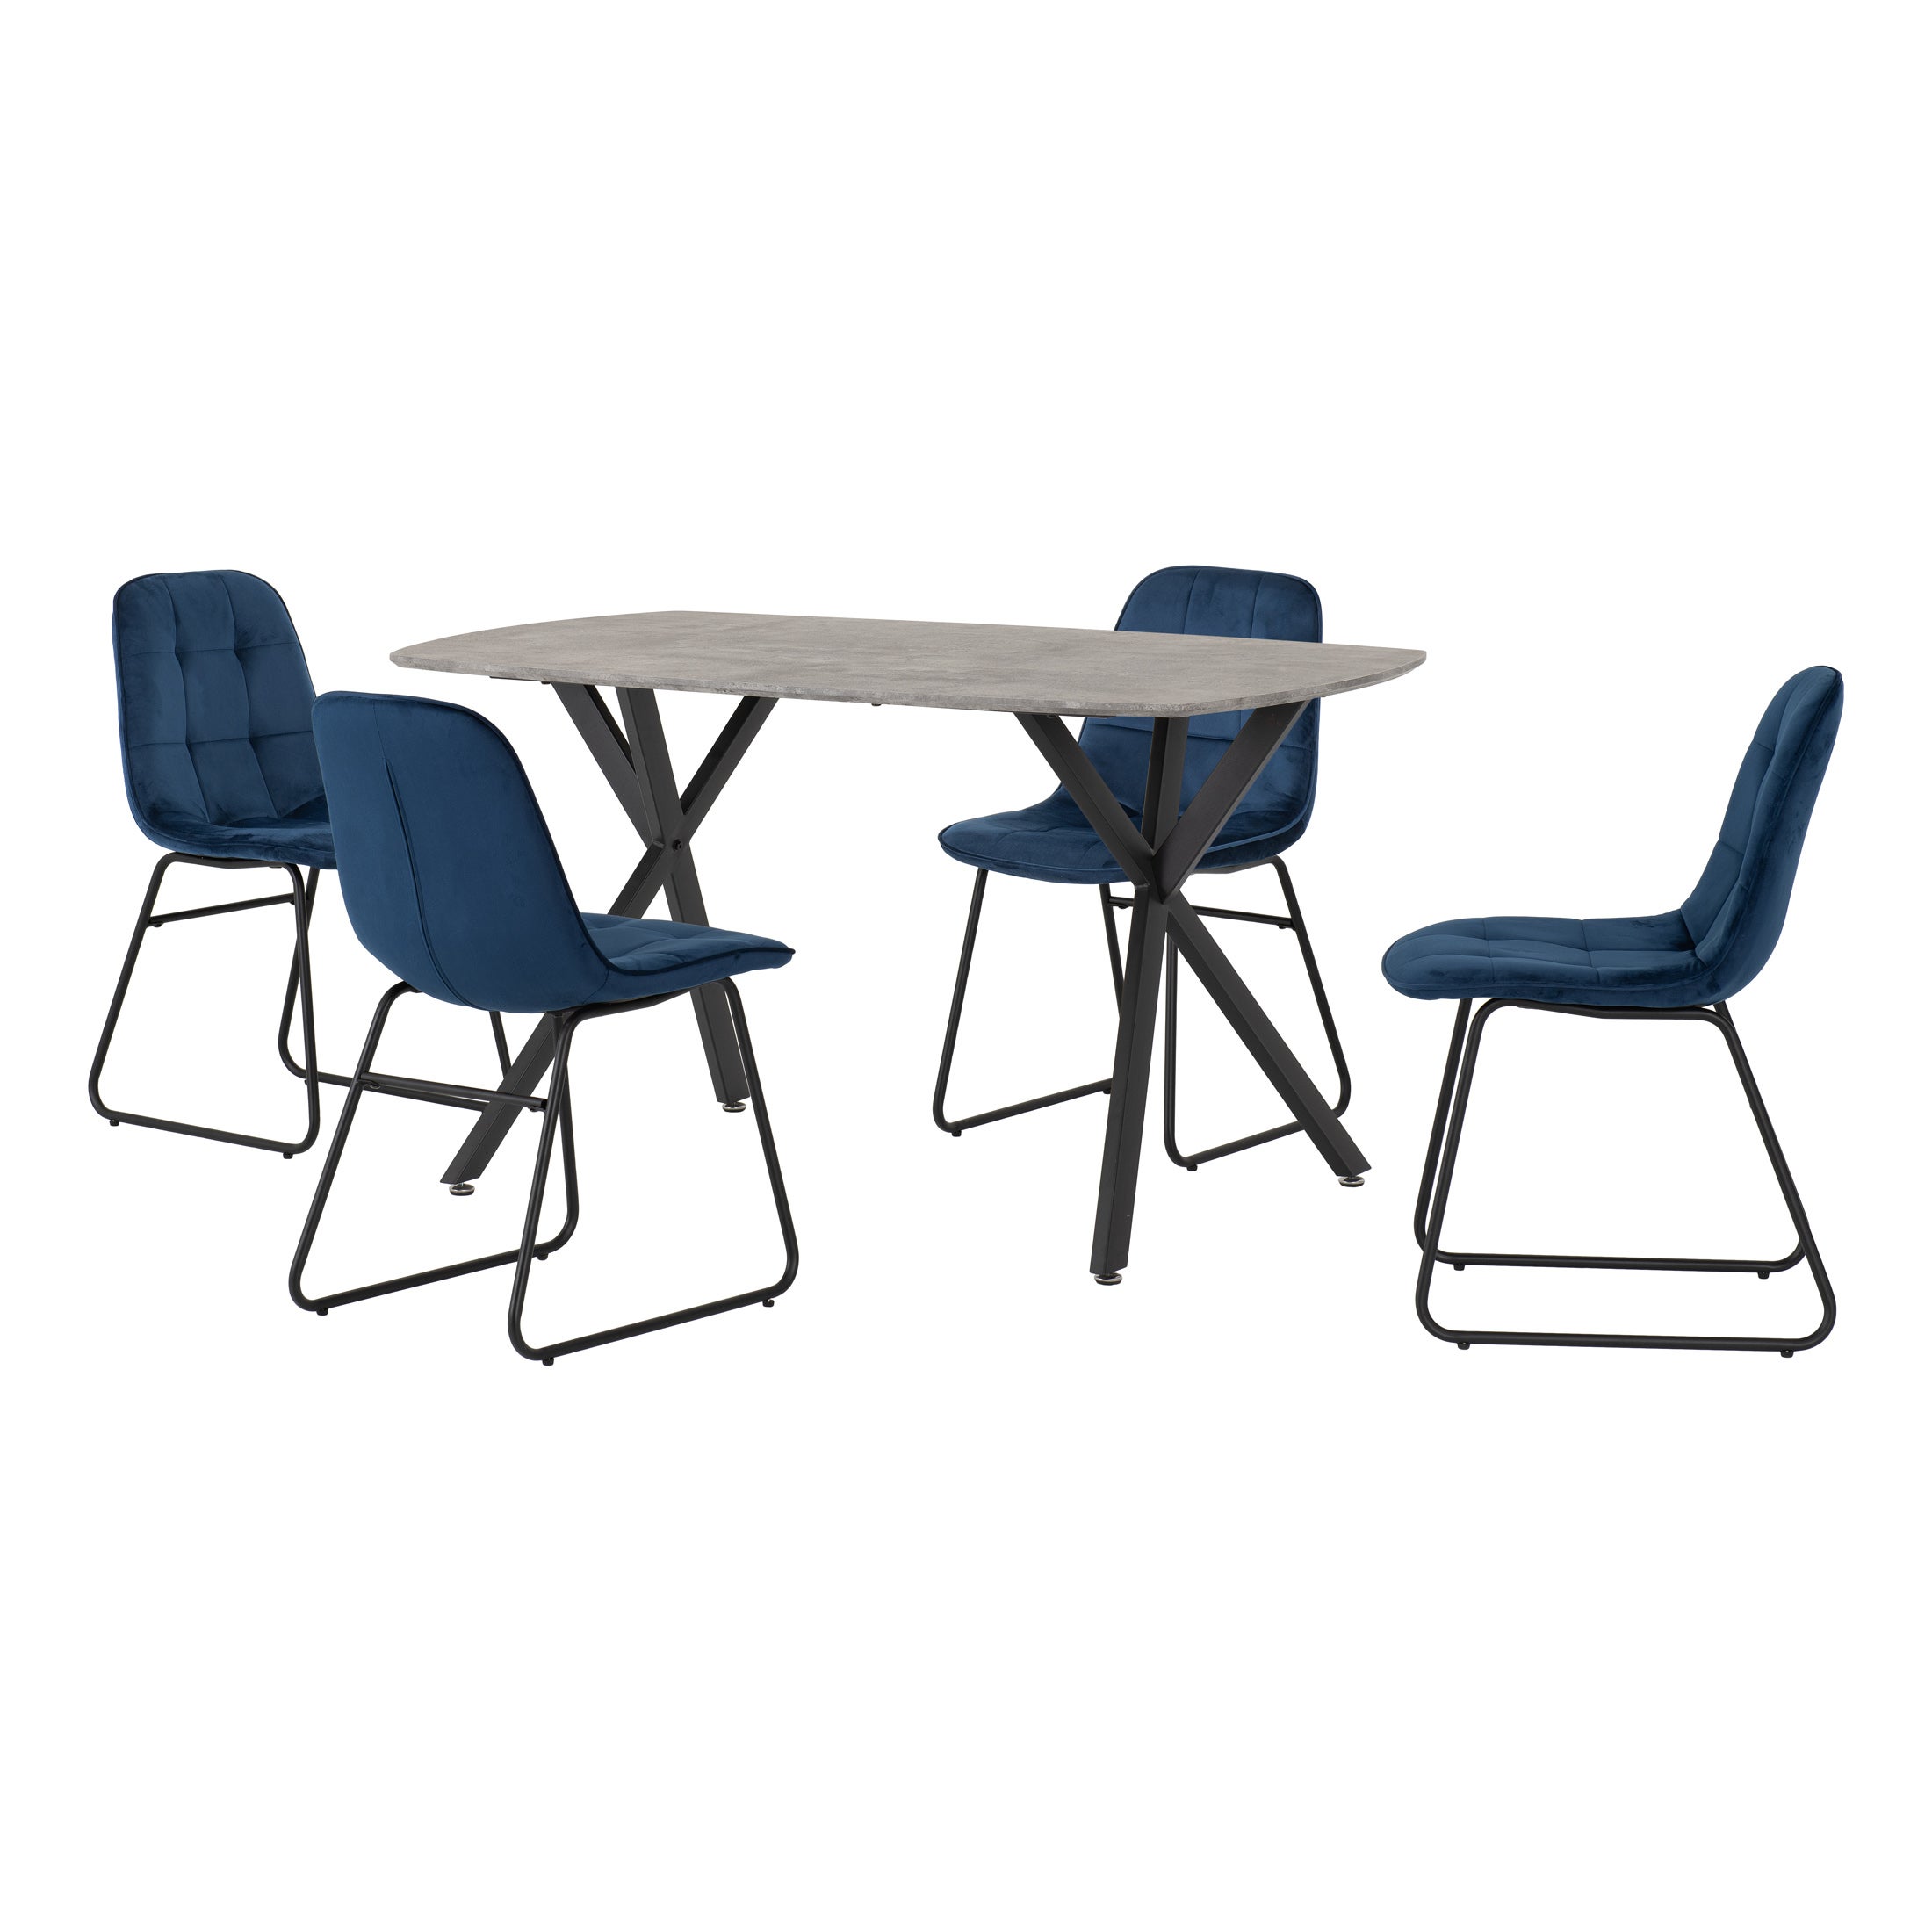 Athens Rectangular Dining Table with 4 Lukas Chairs, Concrete Effect Navy Blue